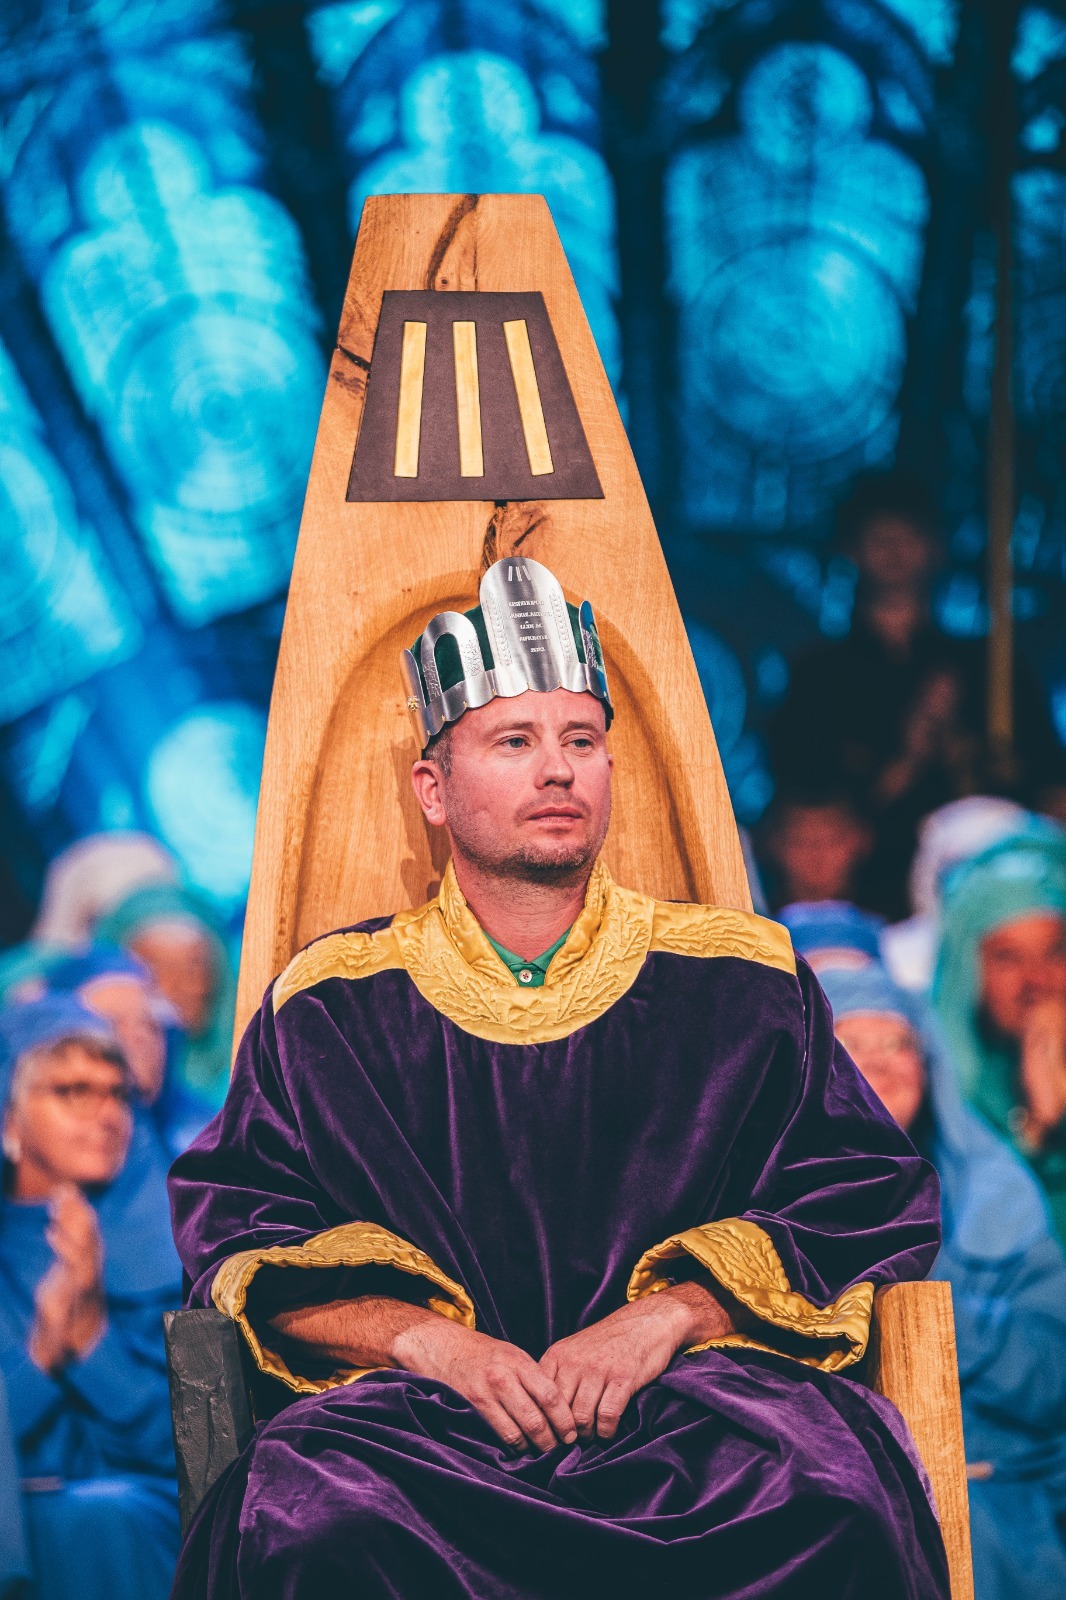 Rhys Iorwerth from Caernarfon was presented with the prize during a coulourful Gorsedd of Bards ceremony. Photo: Eryl Crump